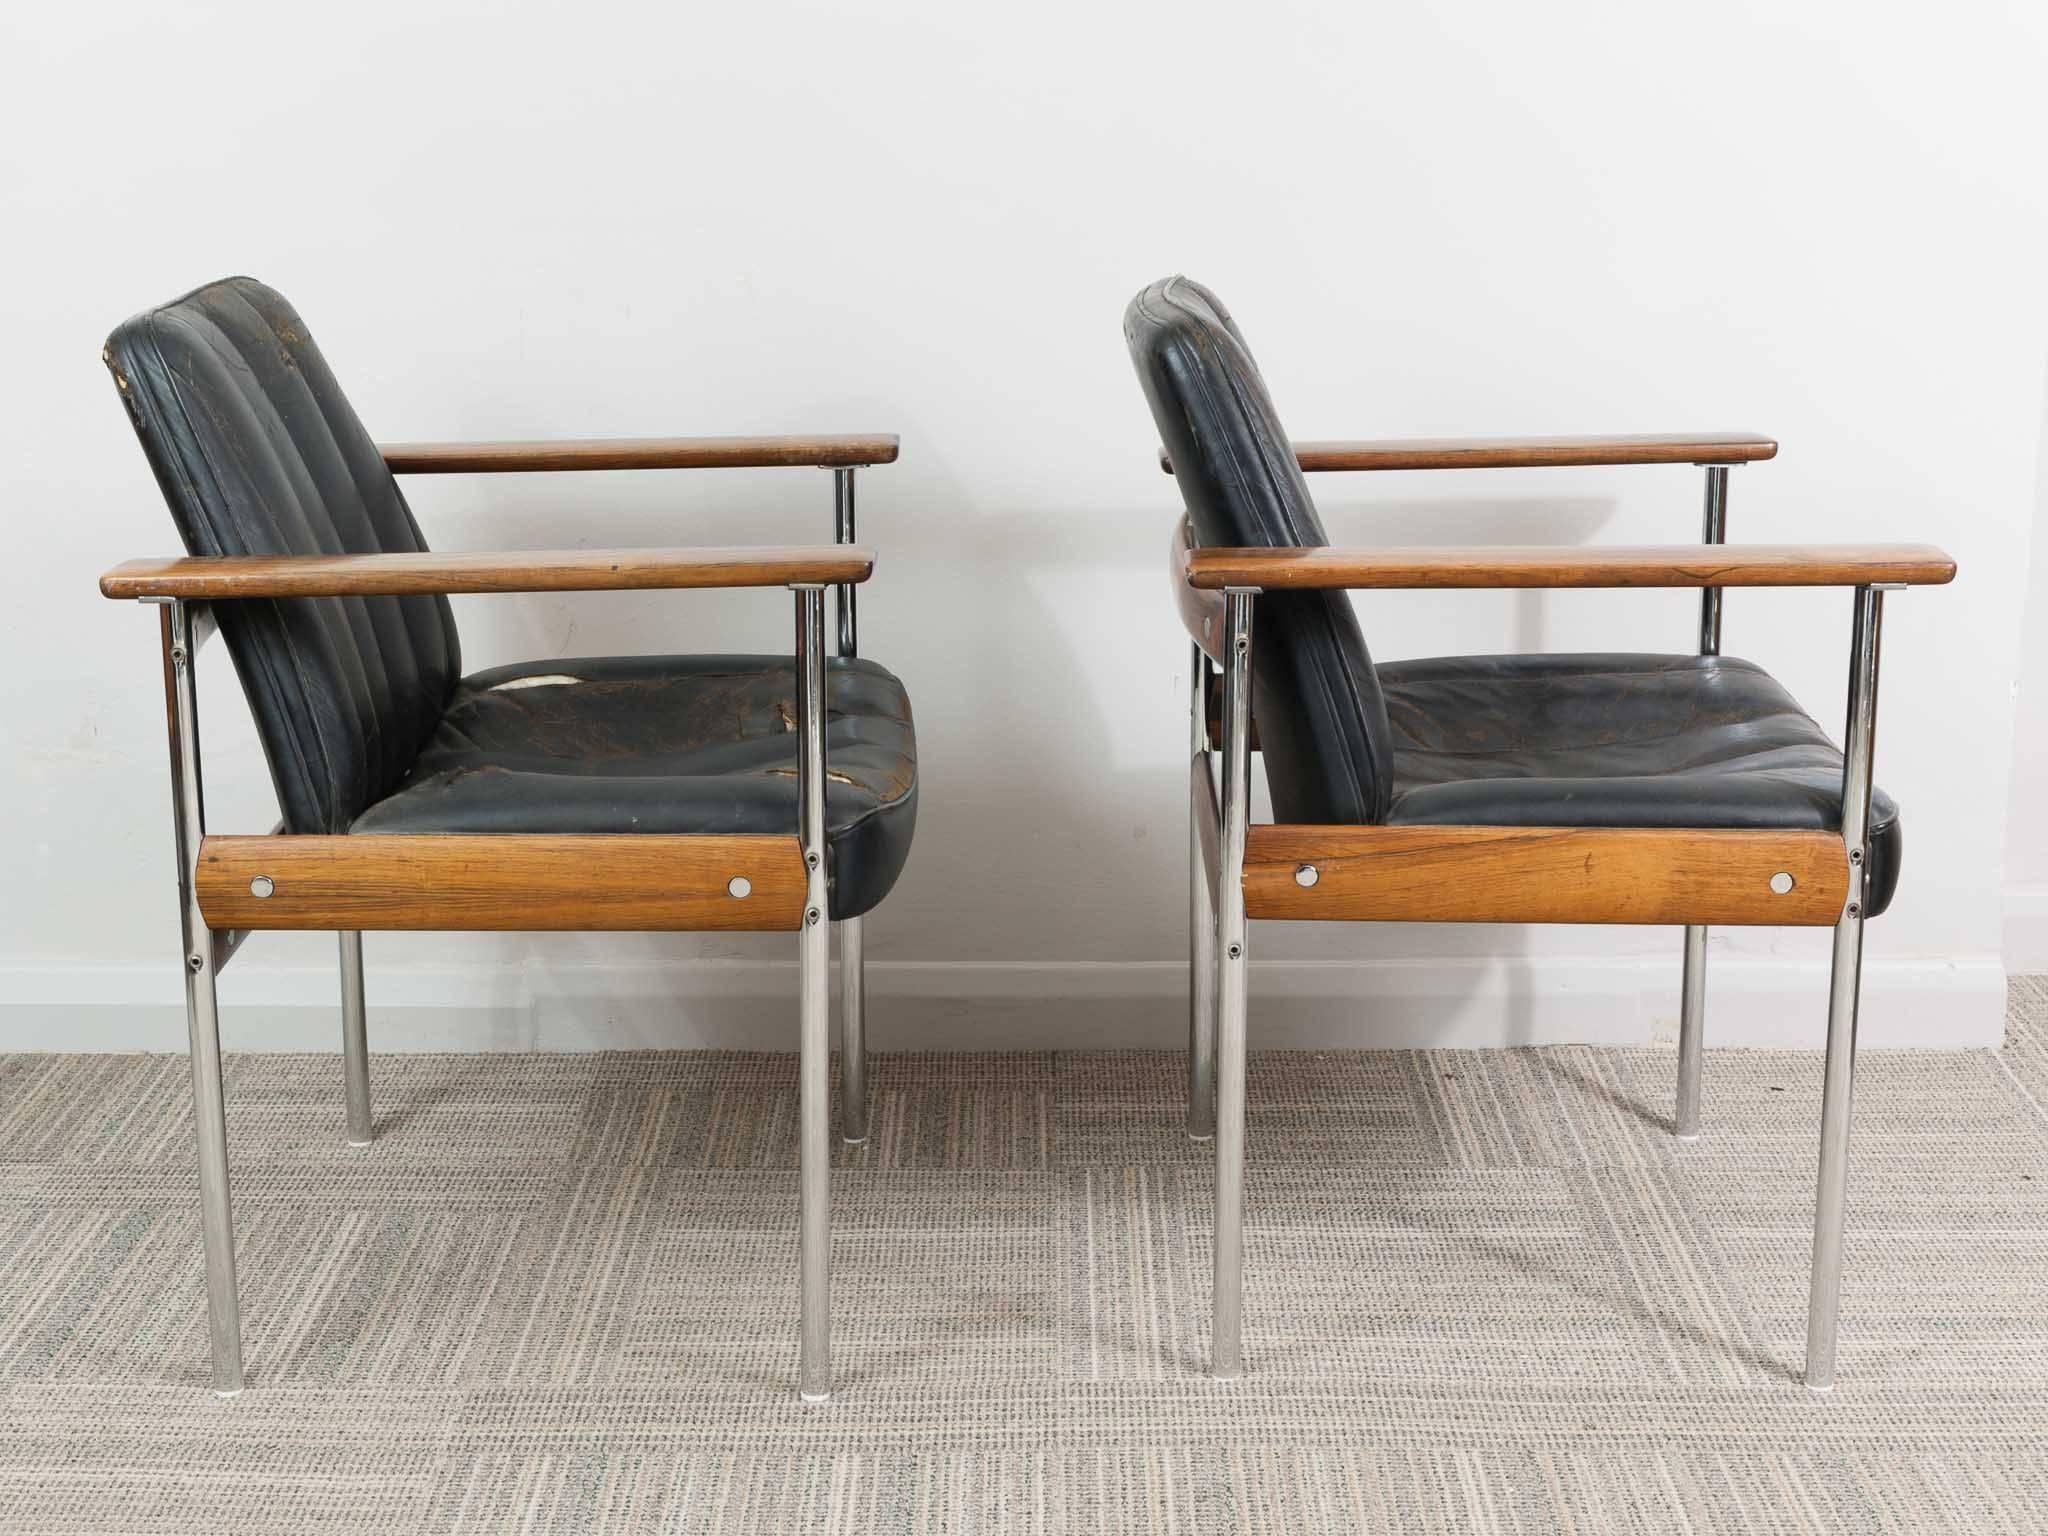 Pair of 1960s Rosewood Leather Chrome Armchairs by Sven Ivar Dysthe for Dokka 1